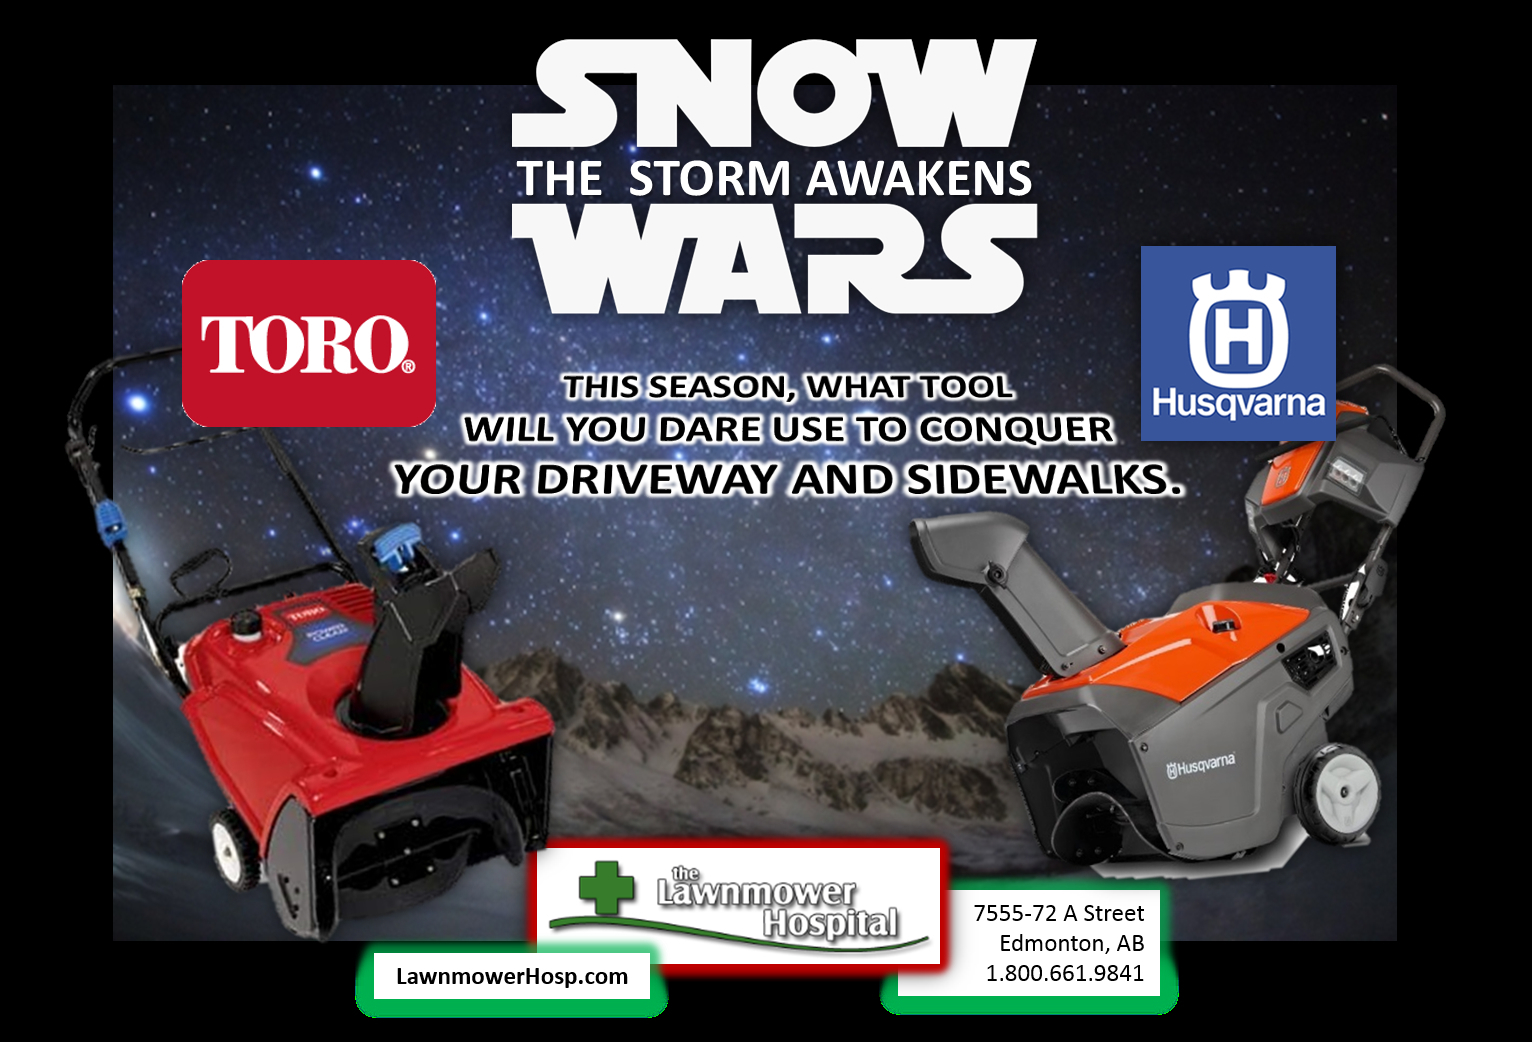 The Lawnmower Hospital - Snow Removal Equipment